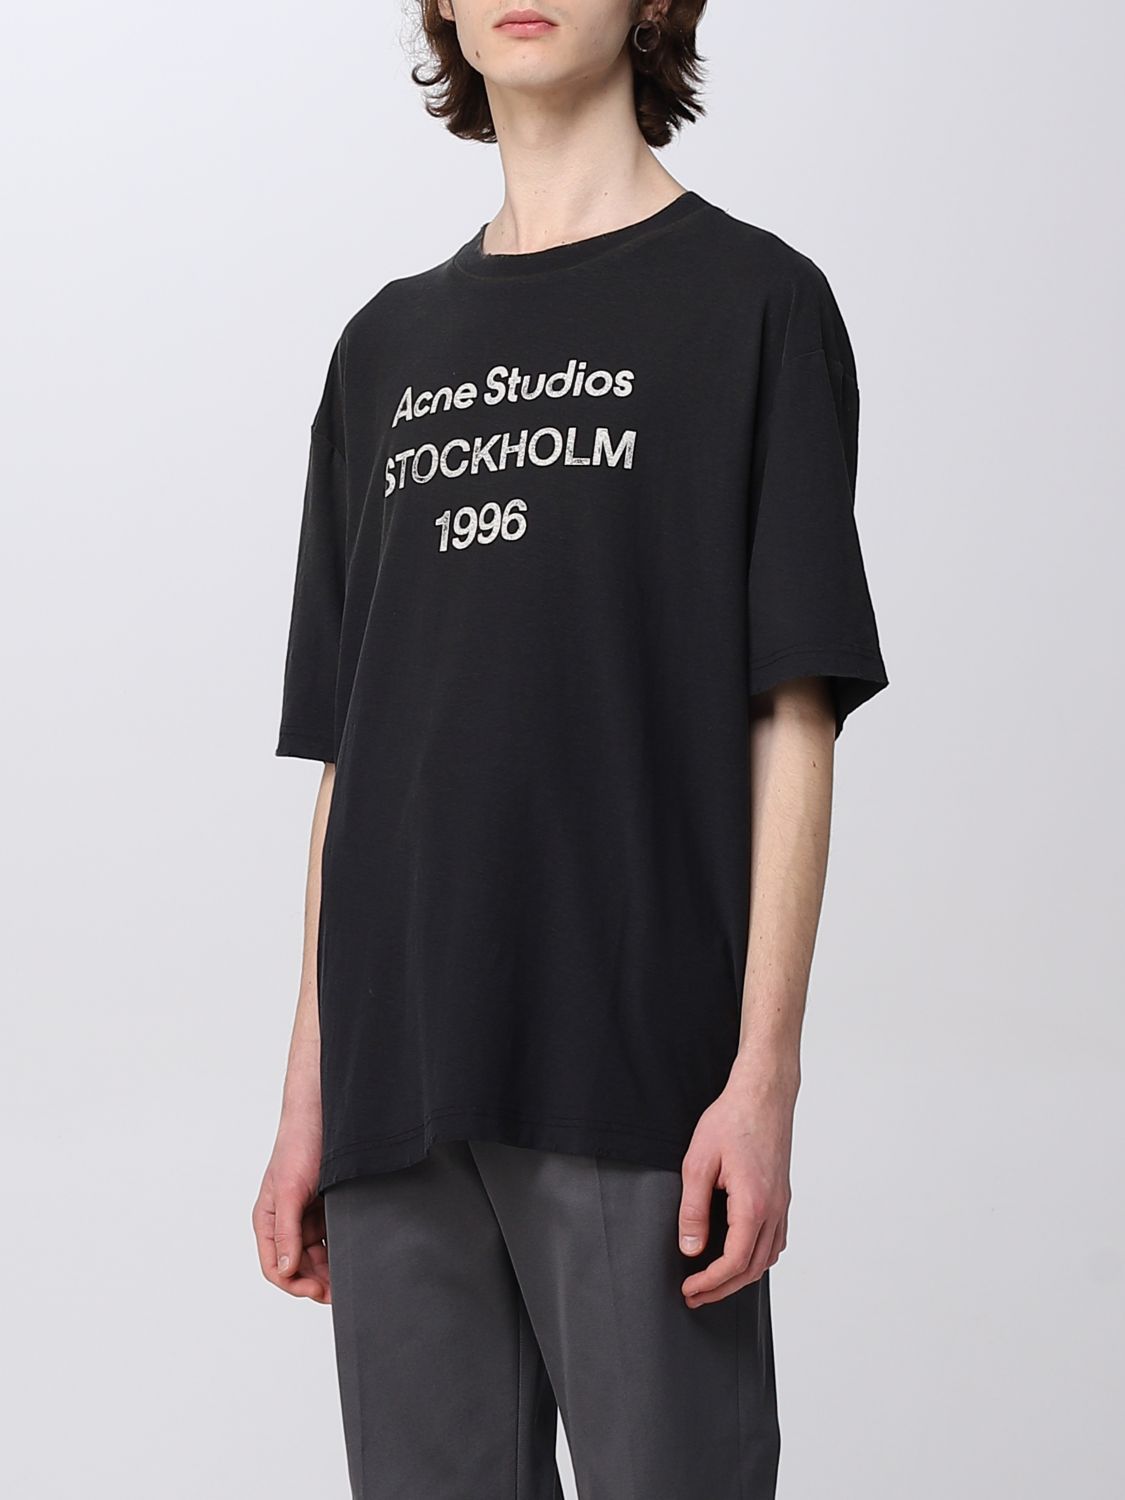 Acne Studios t-shirt with 1996 print